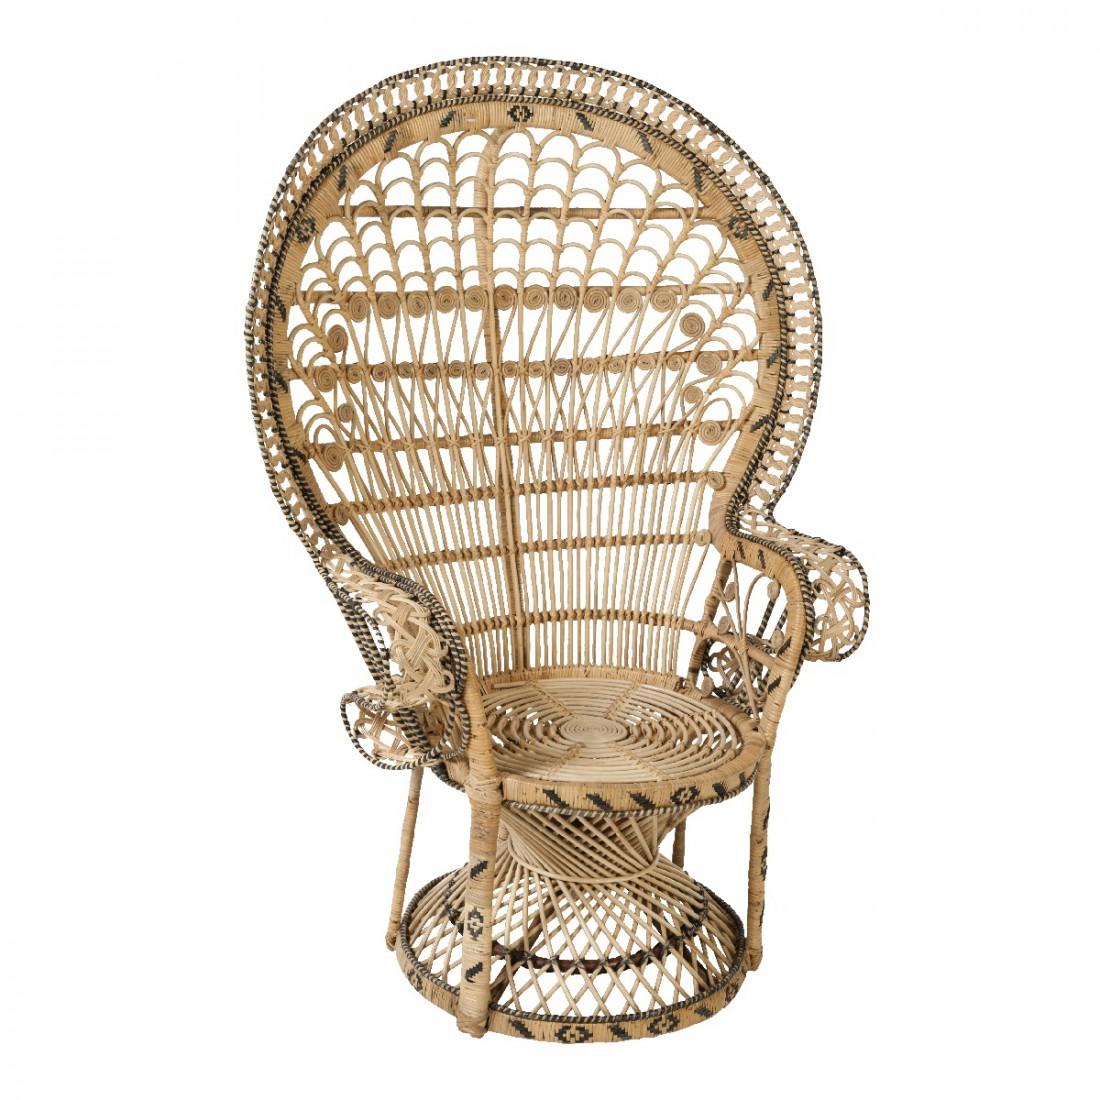 Sculptural and gorgeous Emmanuelle rattan and wicker French 1970s design armchair. Vintage style centerpiece with a Bohemian chic look!